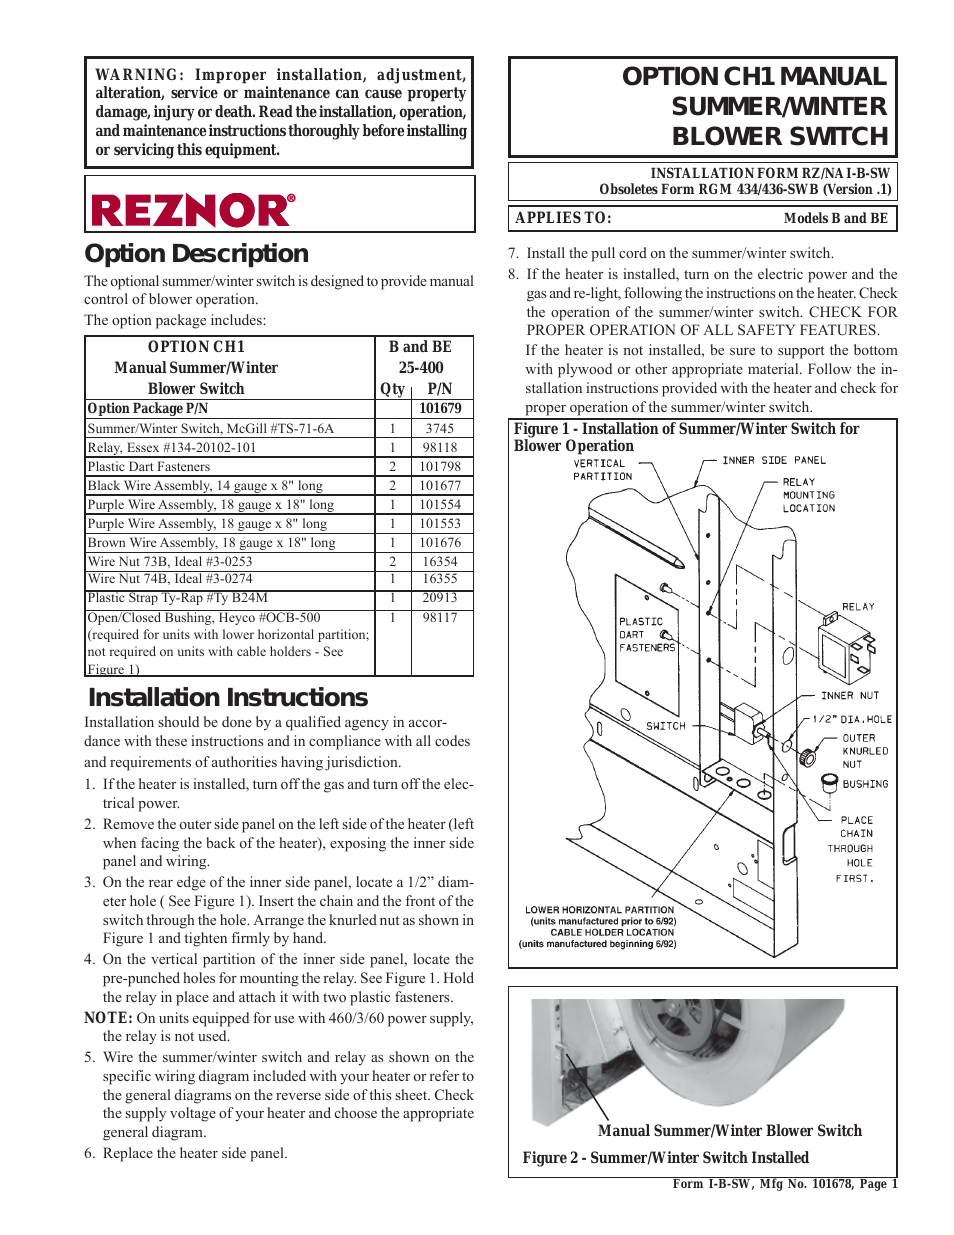 BE Option - Installation - Summer/Winter Blower Switch Instructions